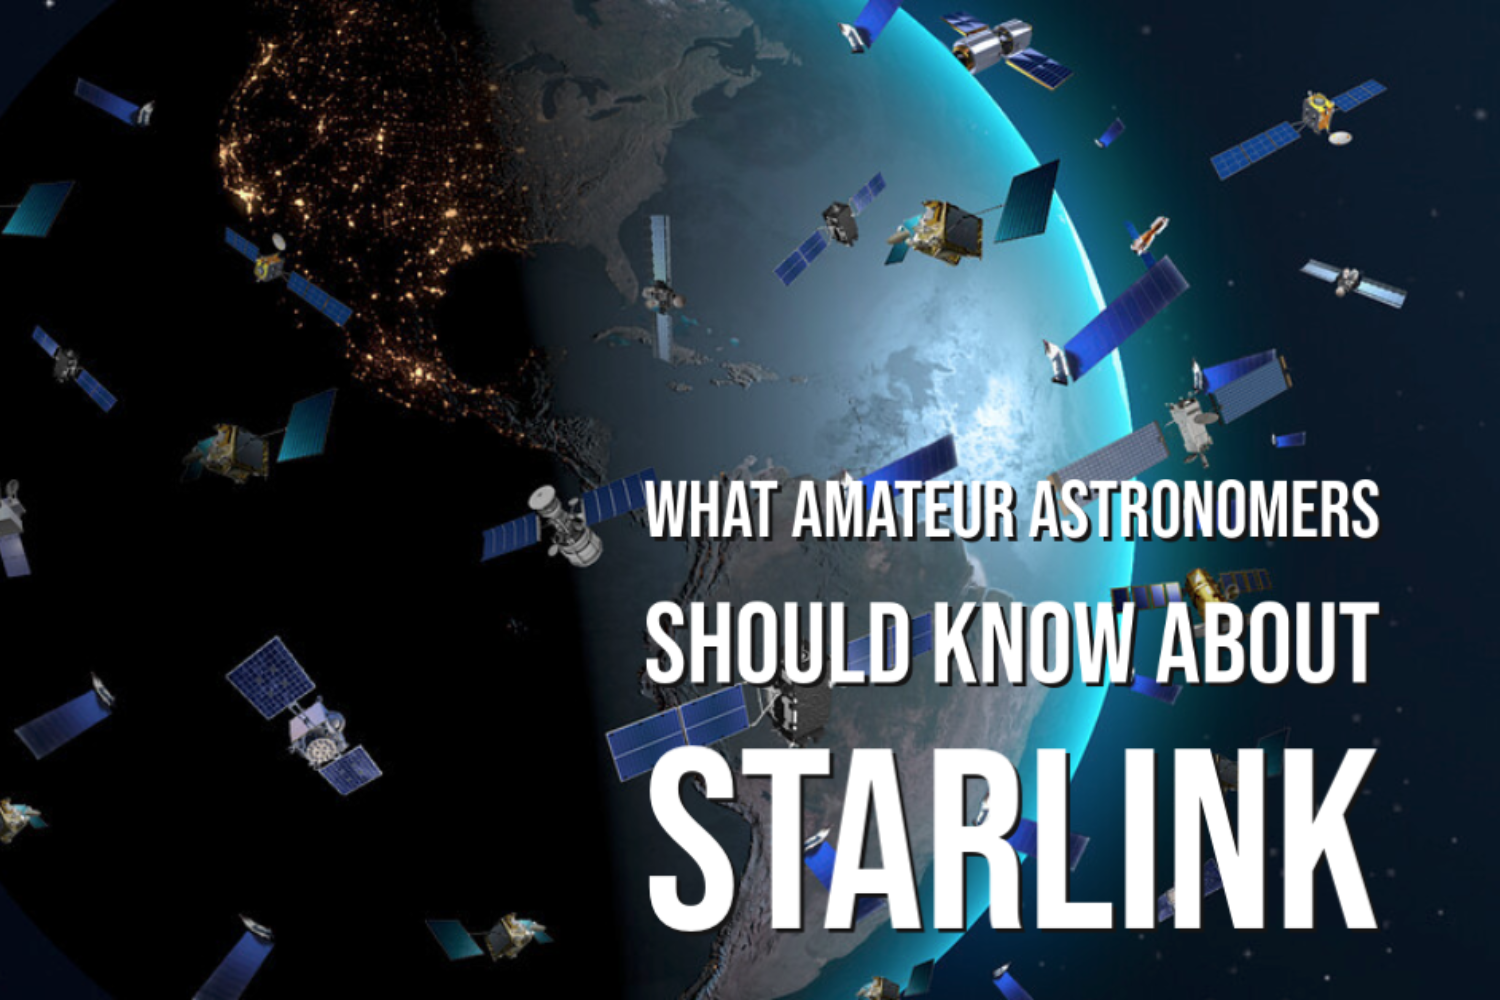 What Amateur Astronomers Should Know about Starlink